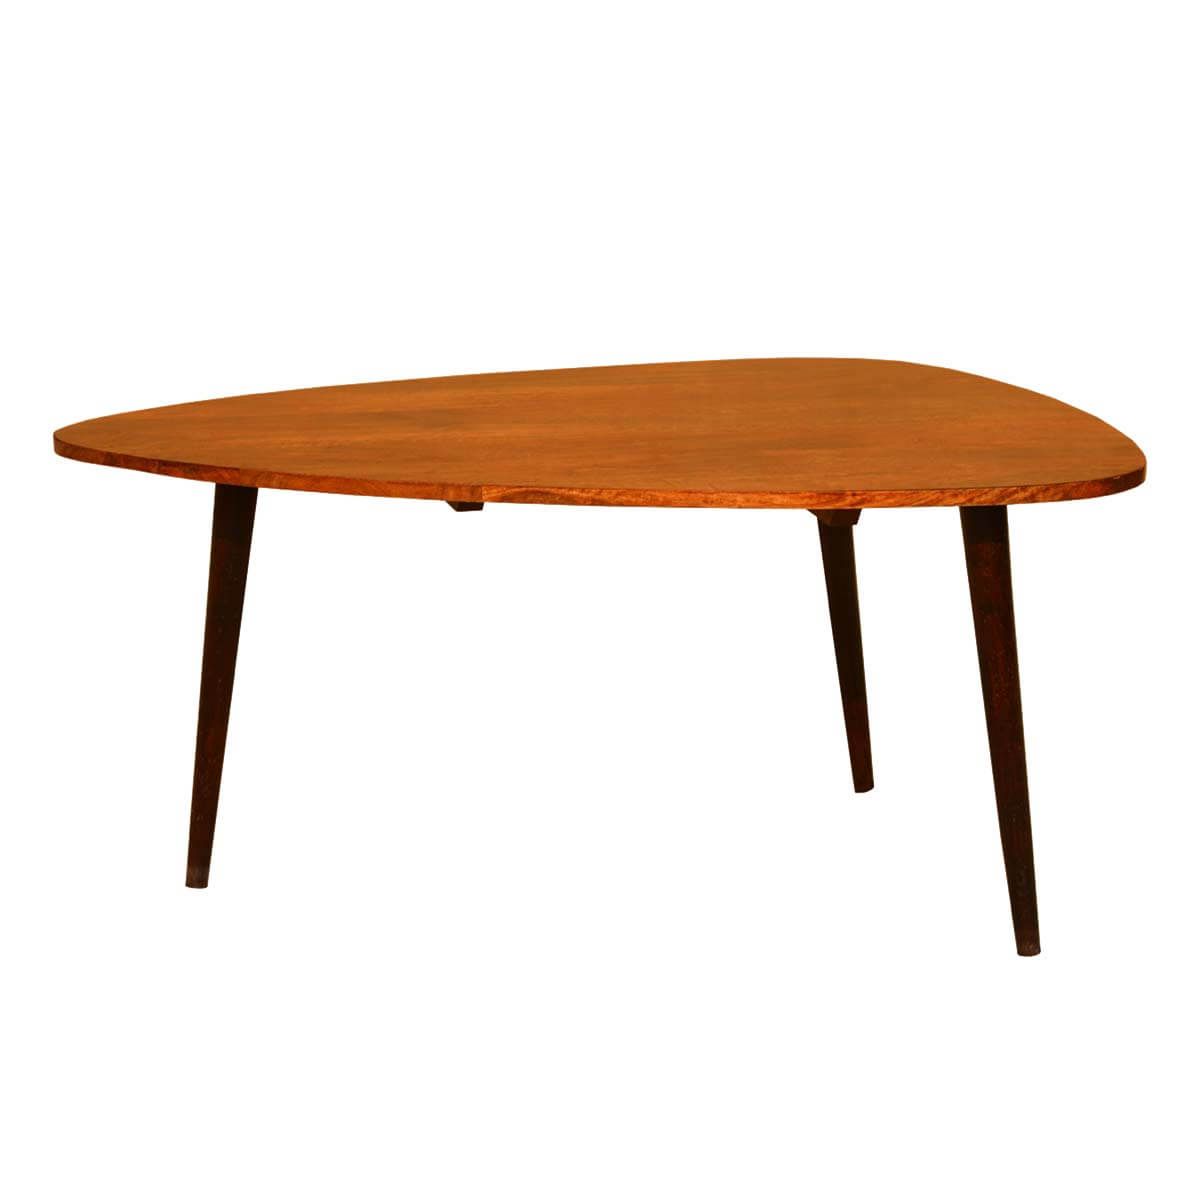 Best And Newest Triangular Coffee Tables Inside Arrowhead Mango Wood Triangular Coffee Table (Gallery 3 of 20)